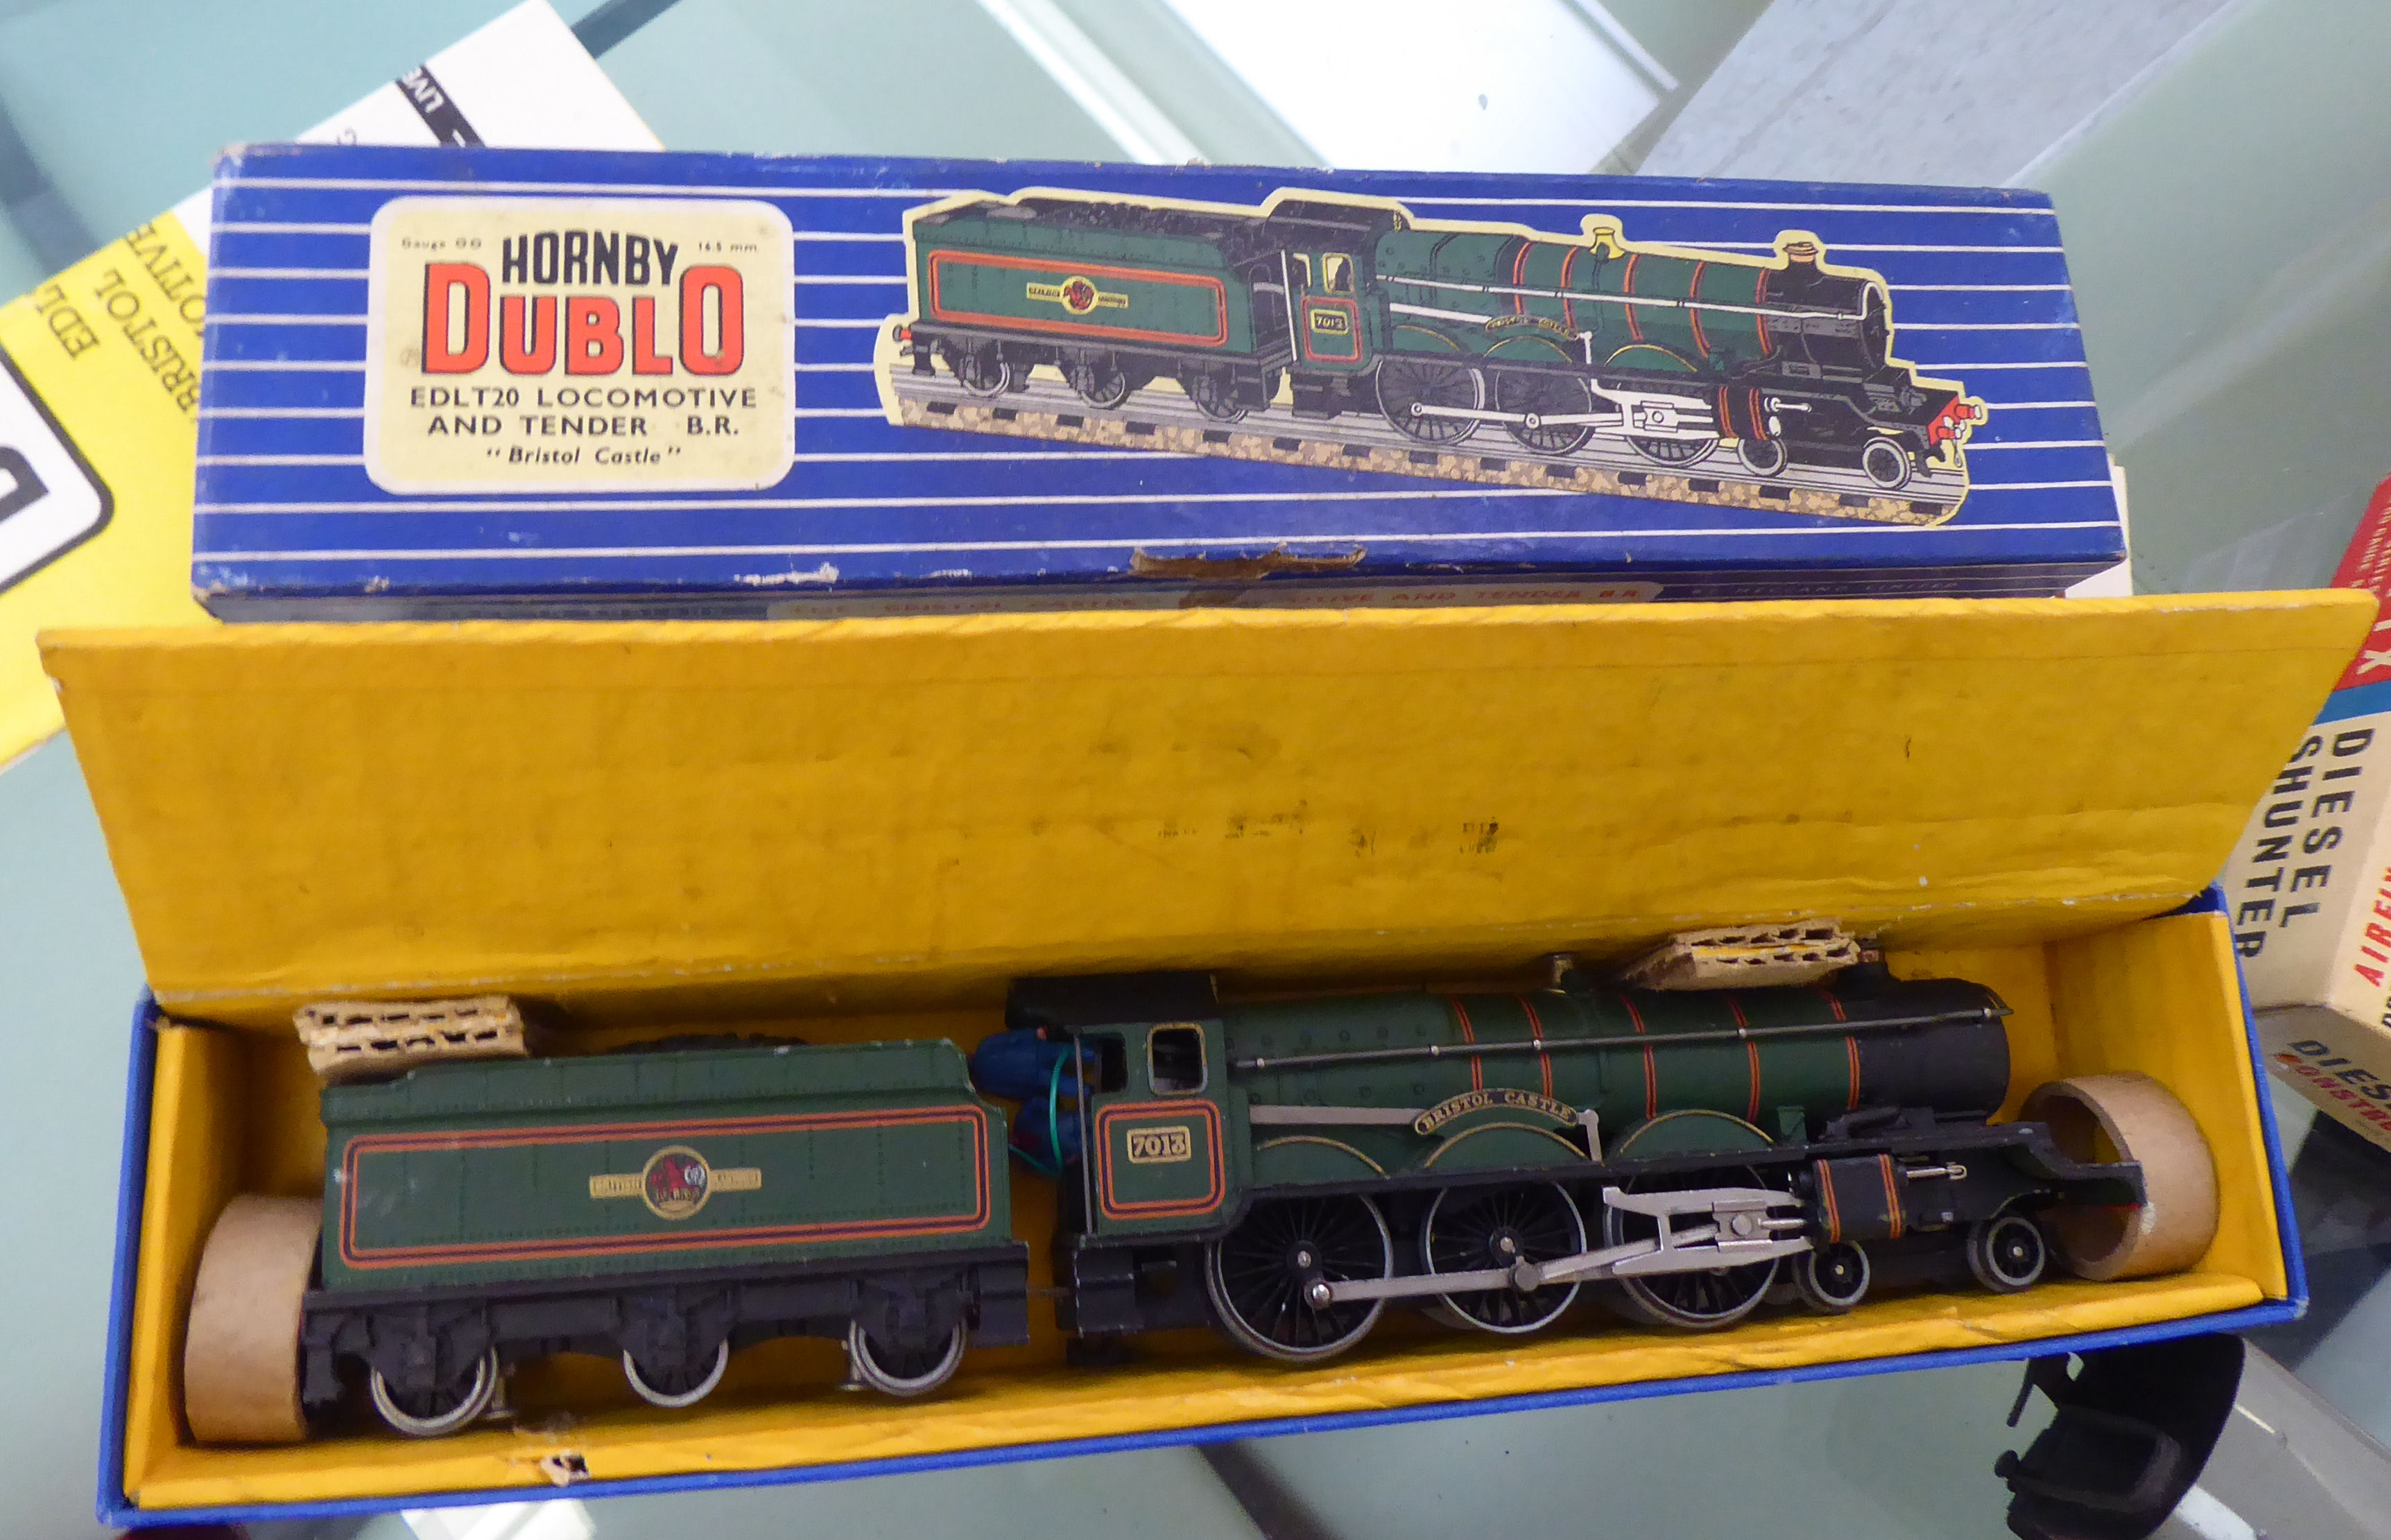 Mainly Hornby Dublo trains, wagons, track and accessories, some boxed; and similar contemporary - Image 3 of 6